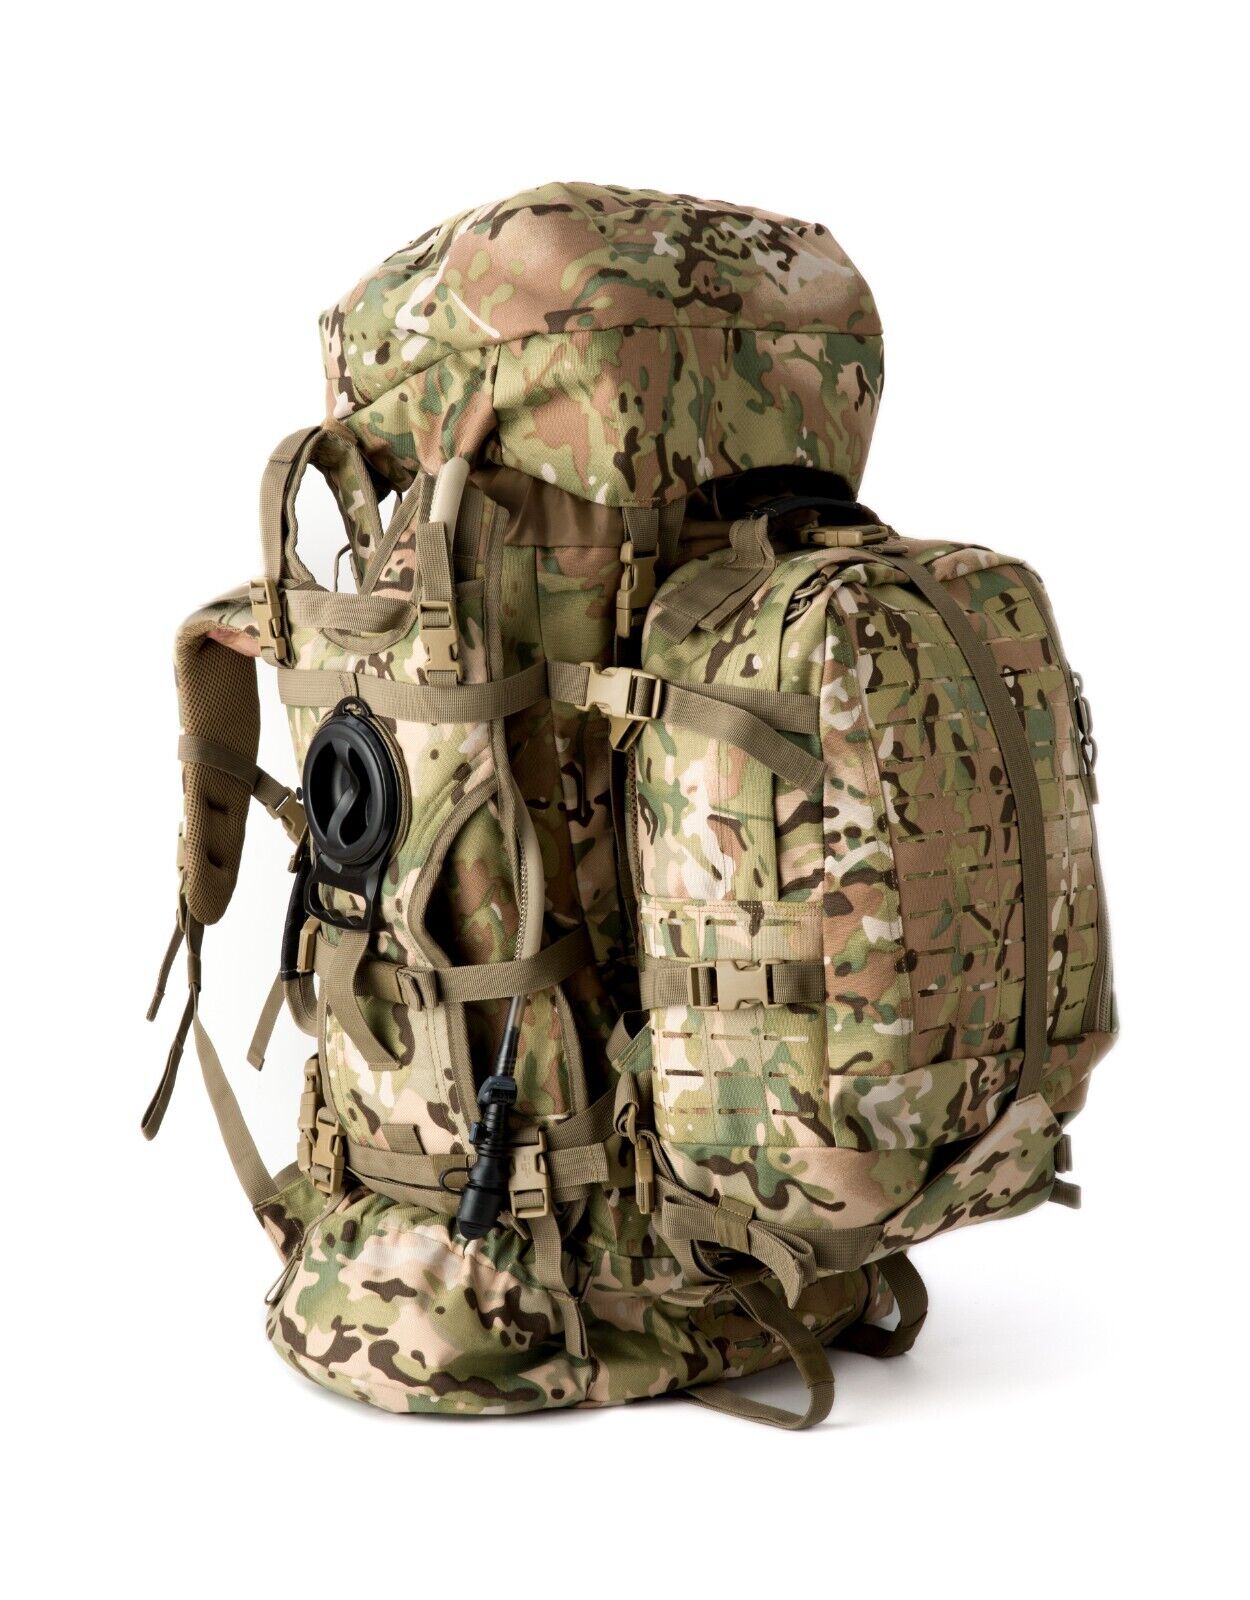 MT Military Large Rucksack with Detacheable Tactical Assault Backpack Multicam